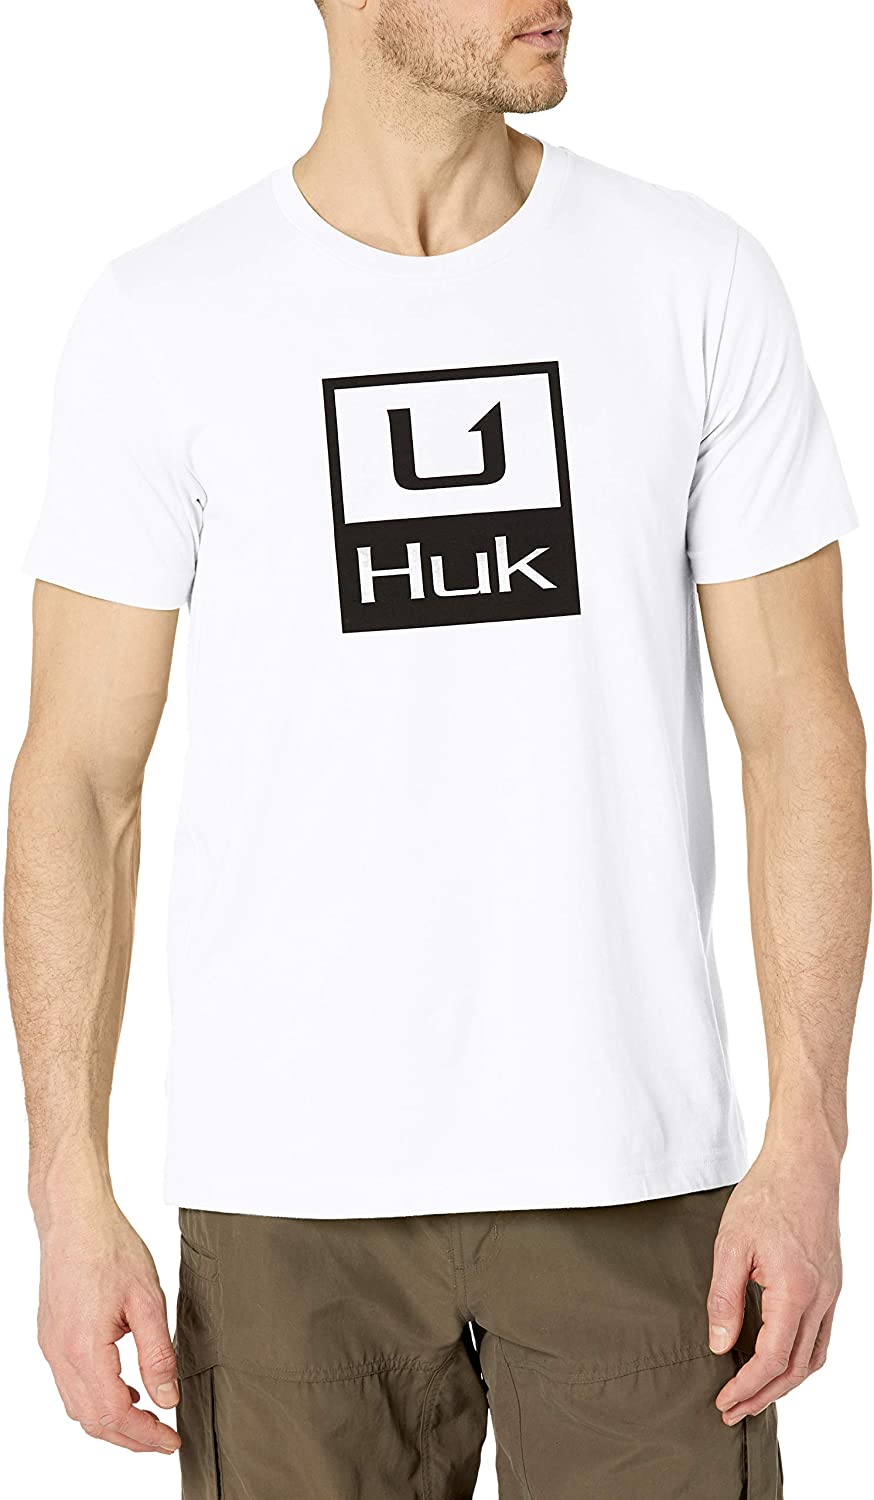 Men's Huk Huk'd Up Performance Tee in White from the front